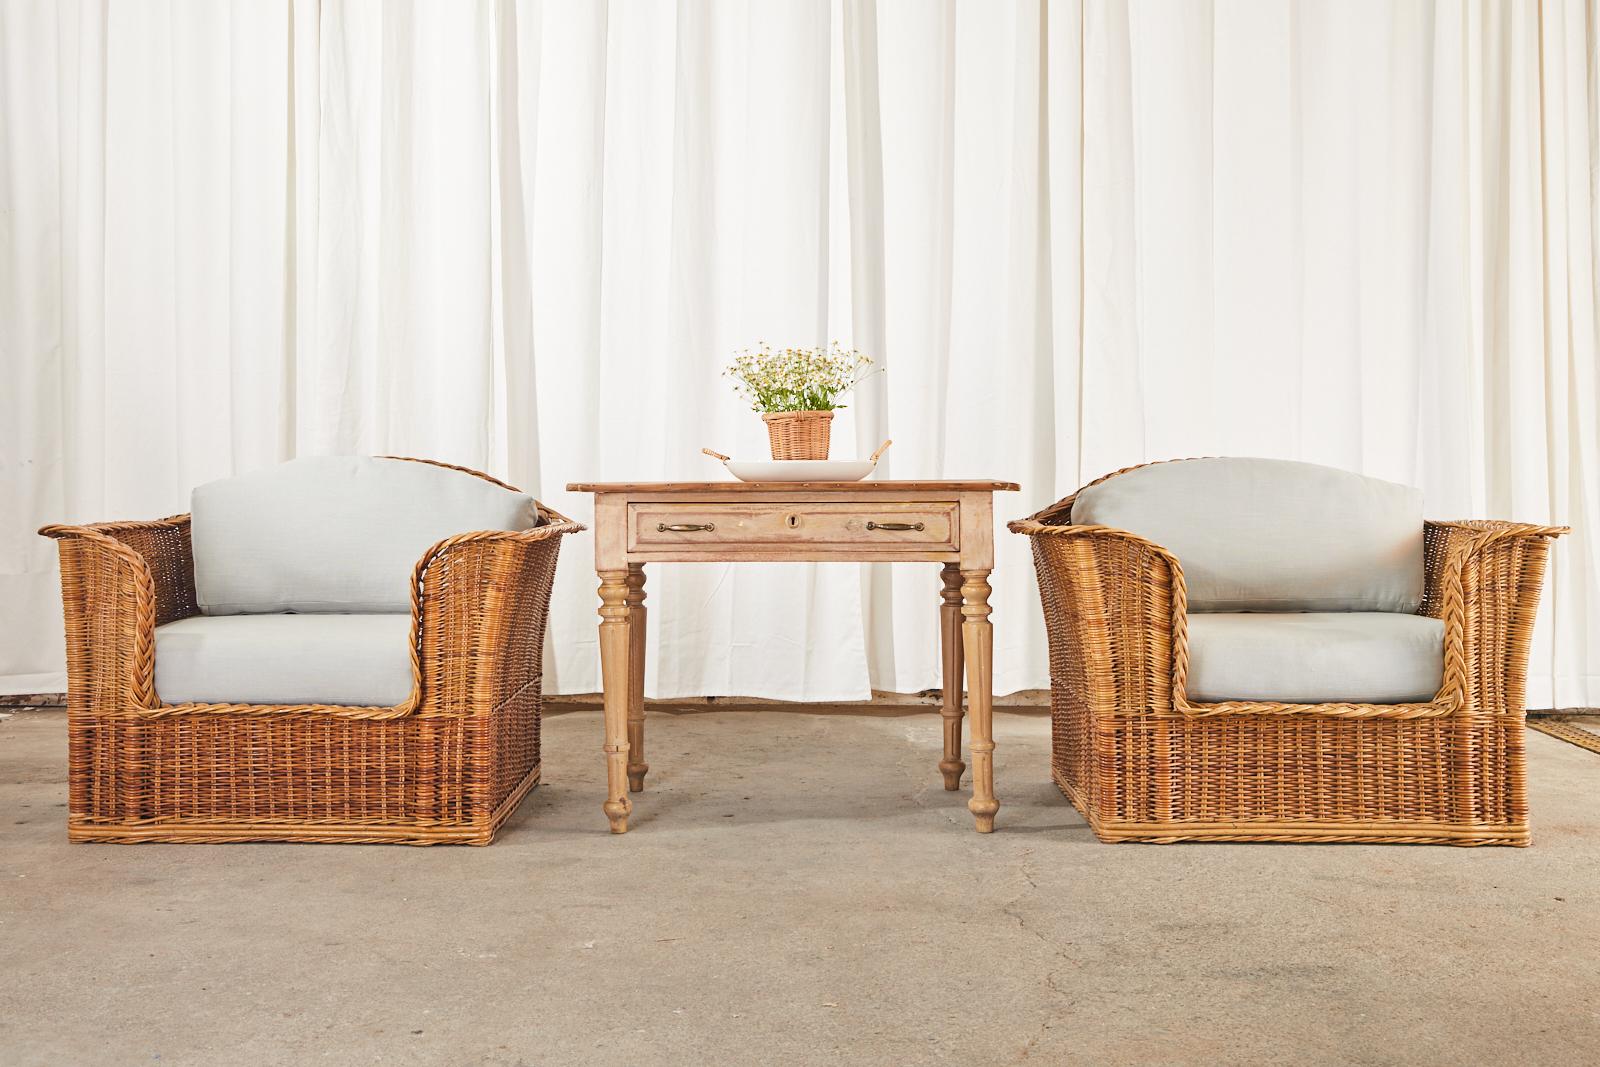 California organic modern style pair of rattan and stick wicker lounge chairs by McGuire. Constructed with rattan frames covered with woven wicker having braided arms and trim. Excellent joinery and craftsmanship with a flared cube profile. These